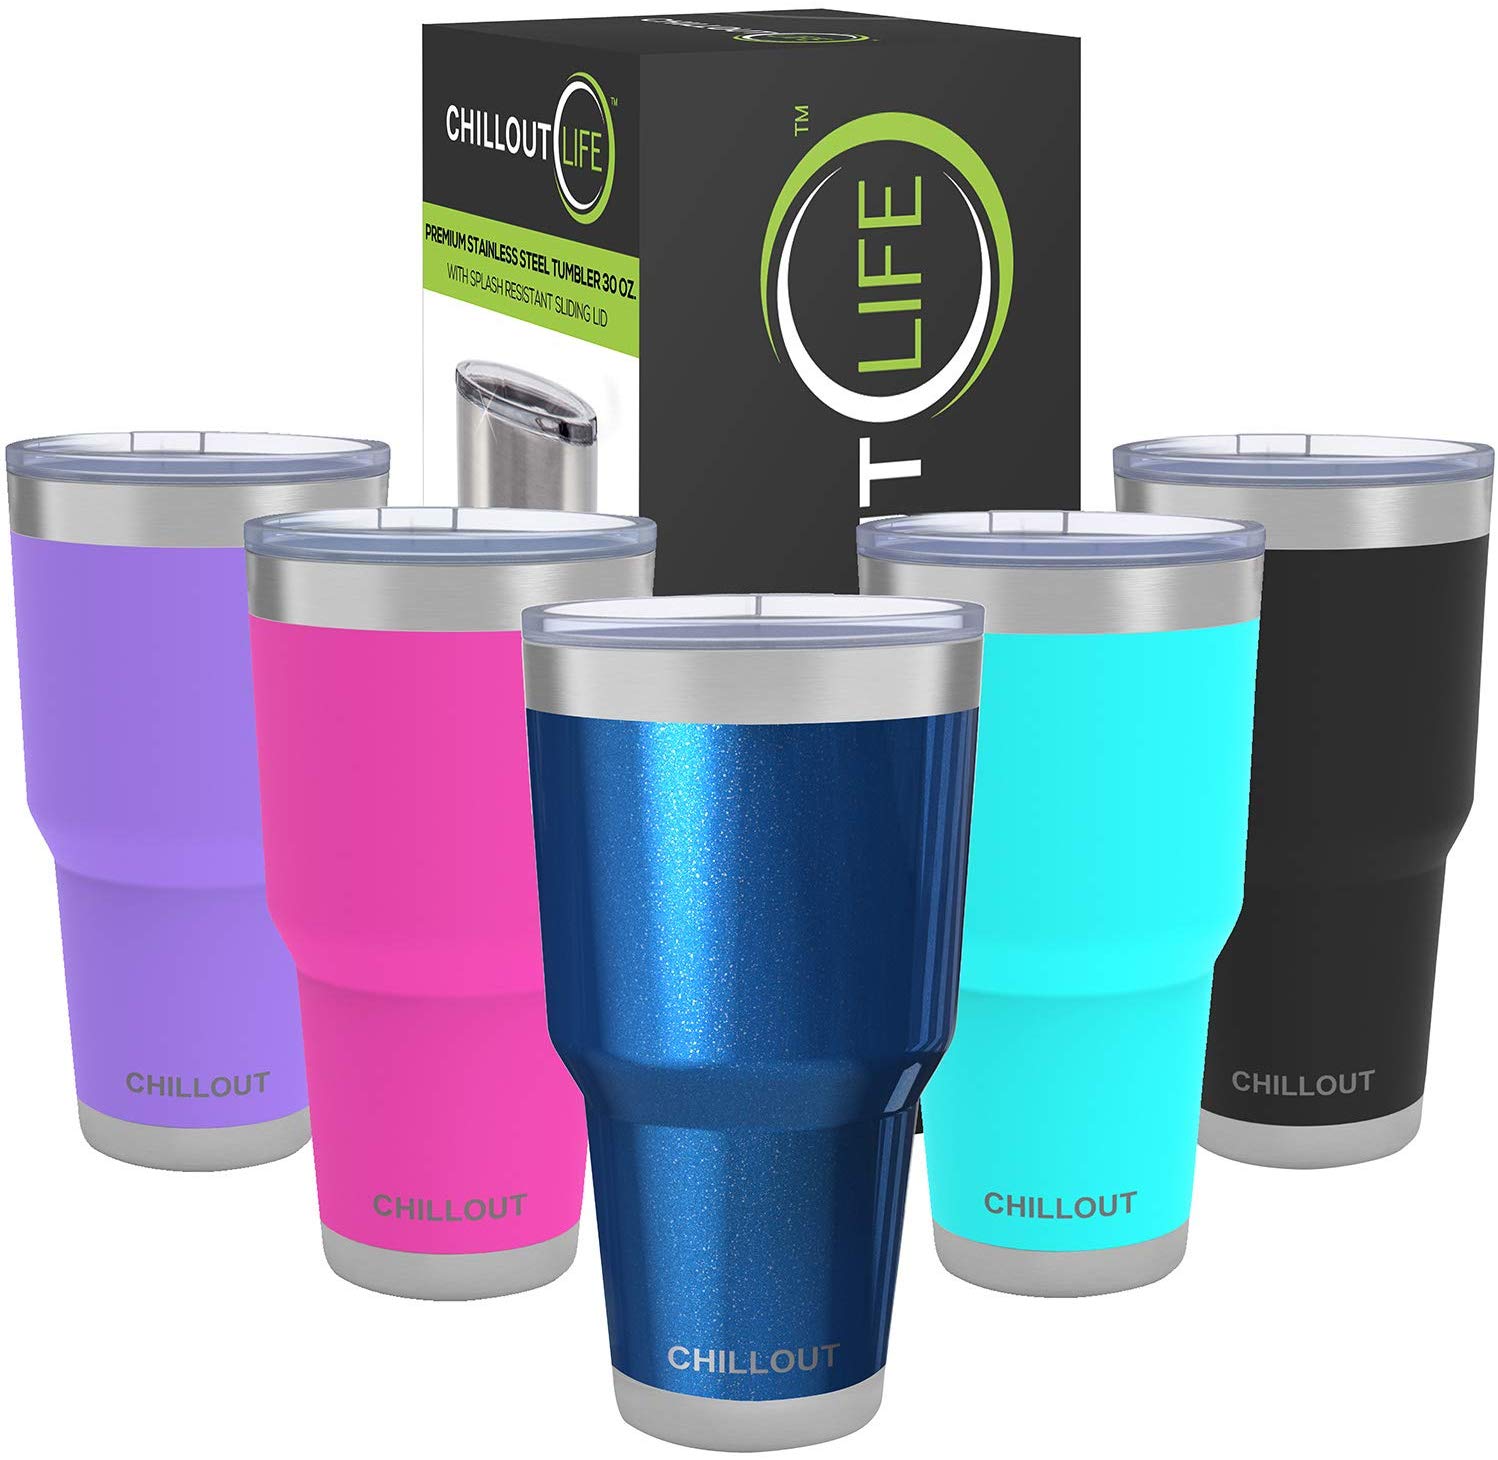 CHILLOUT LIFE Stainless Steel Travel Mug with Handle 30oz – 6 Piece Se